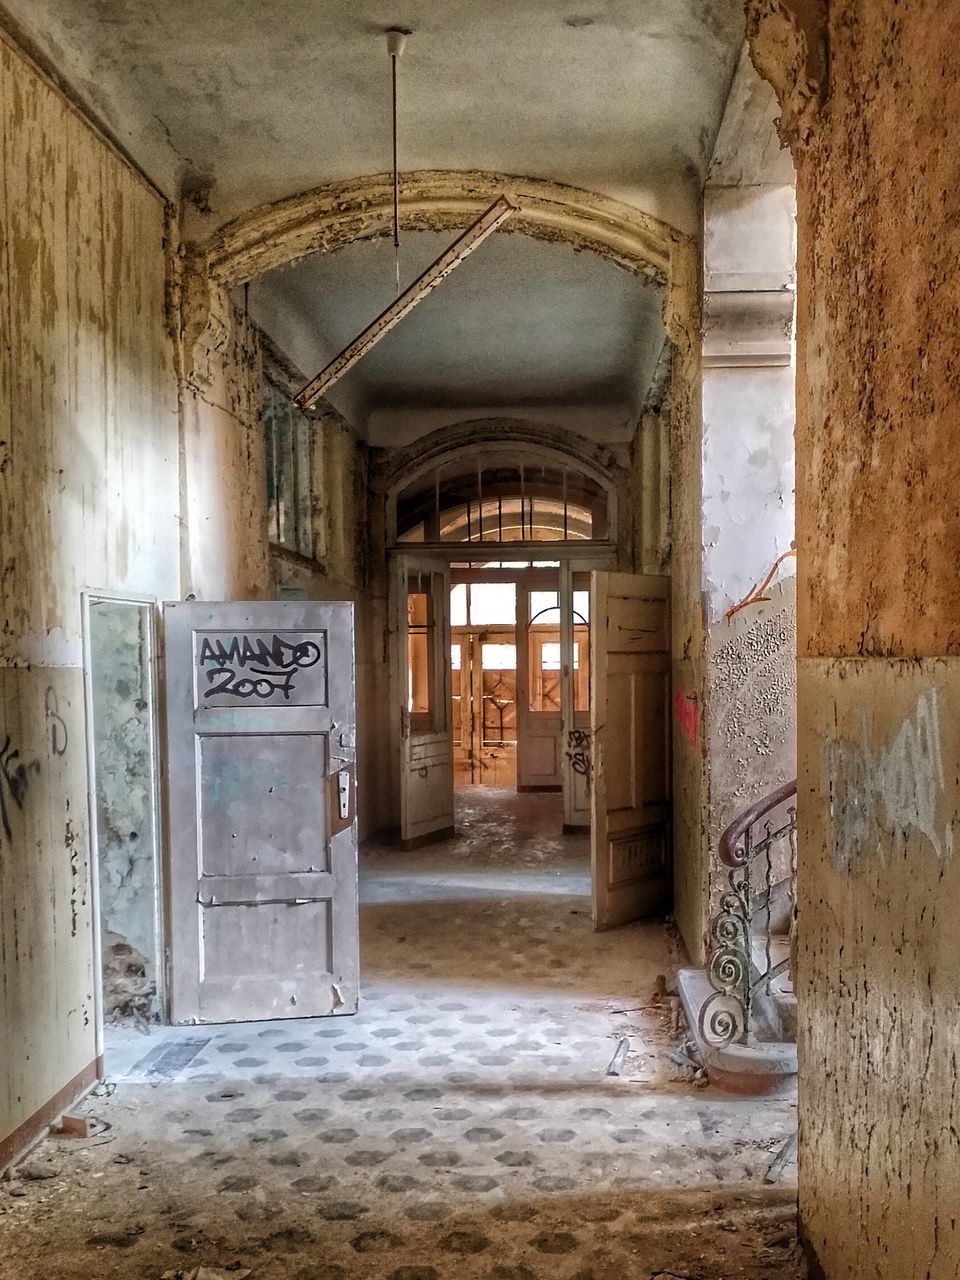 architecture, ancient history, building, history, indoors, built structure, the past, entrance, door, old, no people, abandoned, wall, estate, temple, house, wood, corridor, hall, arcade, wall - building feature, day, interior design, flooring, arch, home, ancient, home interior, doorway, crypt, damaged, rundown, ruined